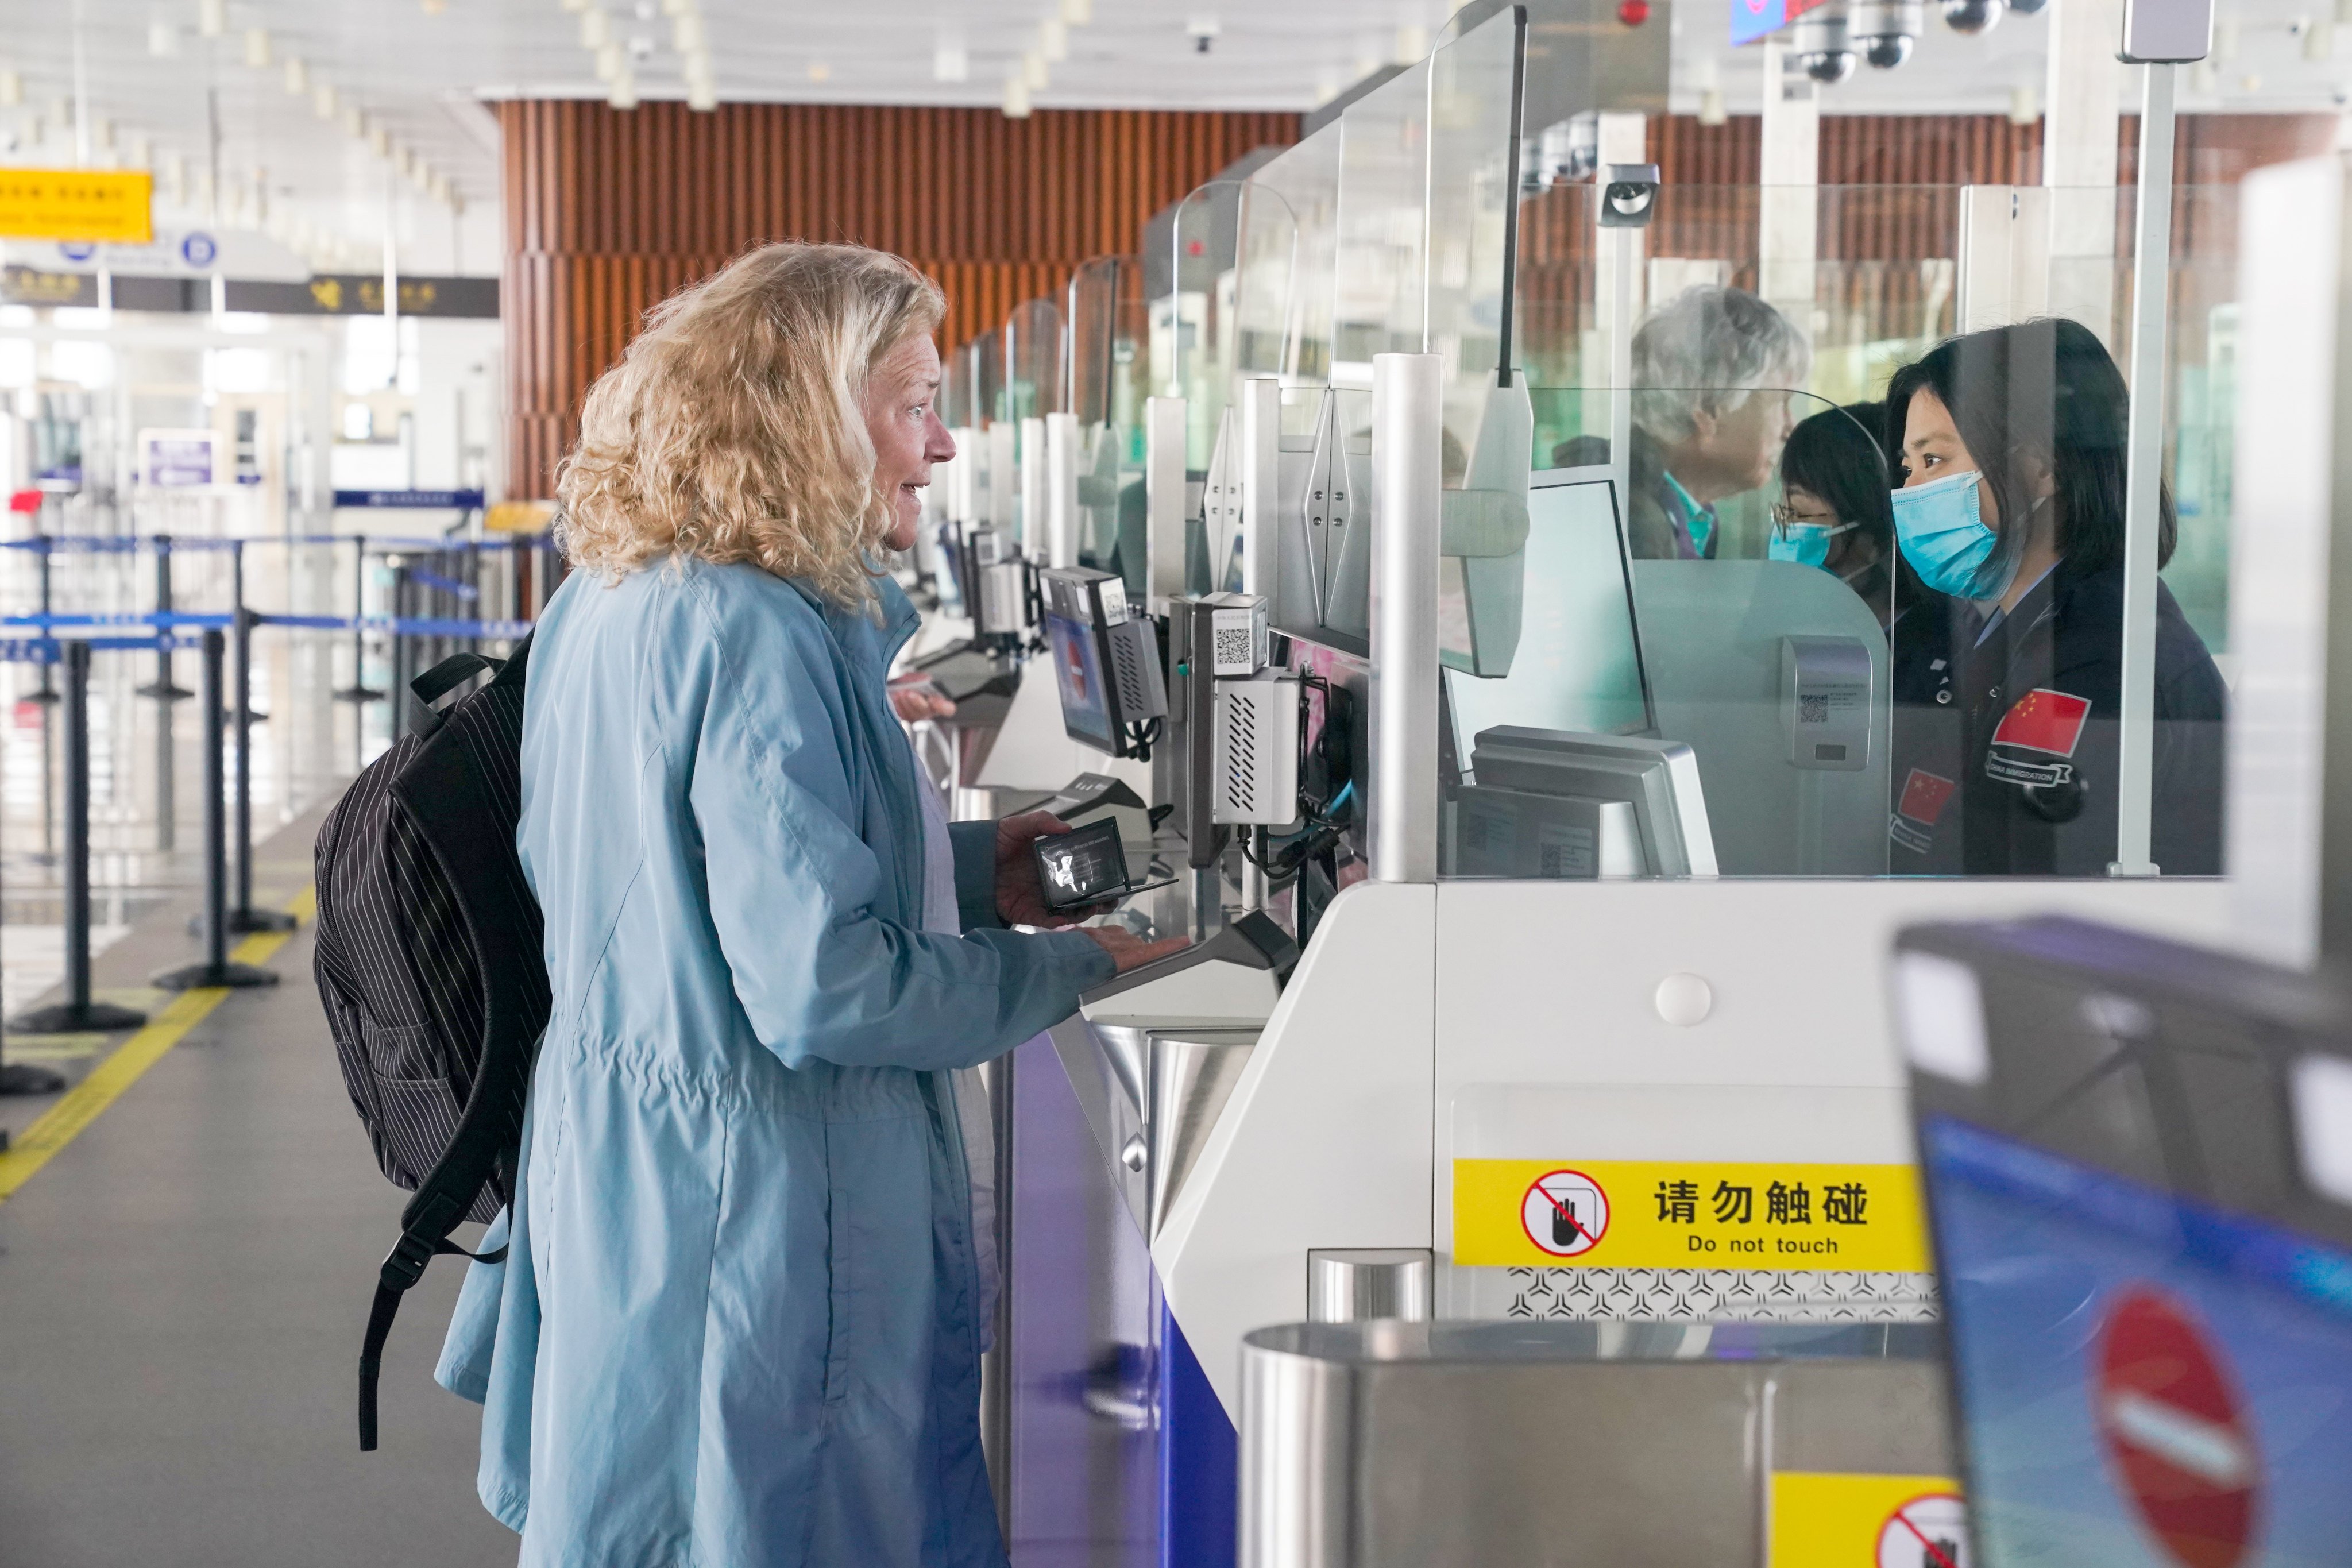 International tourists go through passenger clearance at Tianjin International Cruise Home Port on April 13. Hotels across China have stopped requiring guests to have their faces scanned, amid industry concern about tourism numbers. Photo: Xinhua 